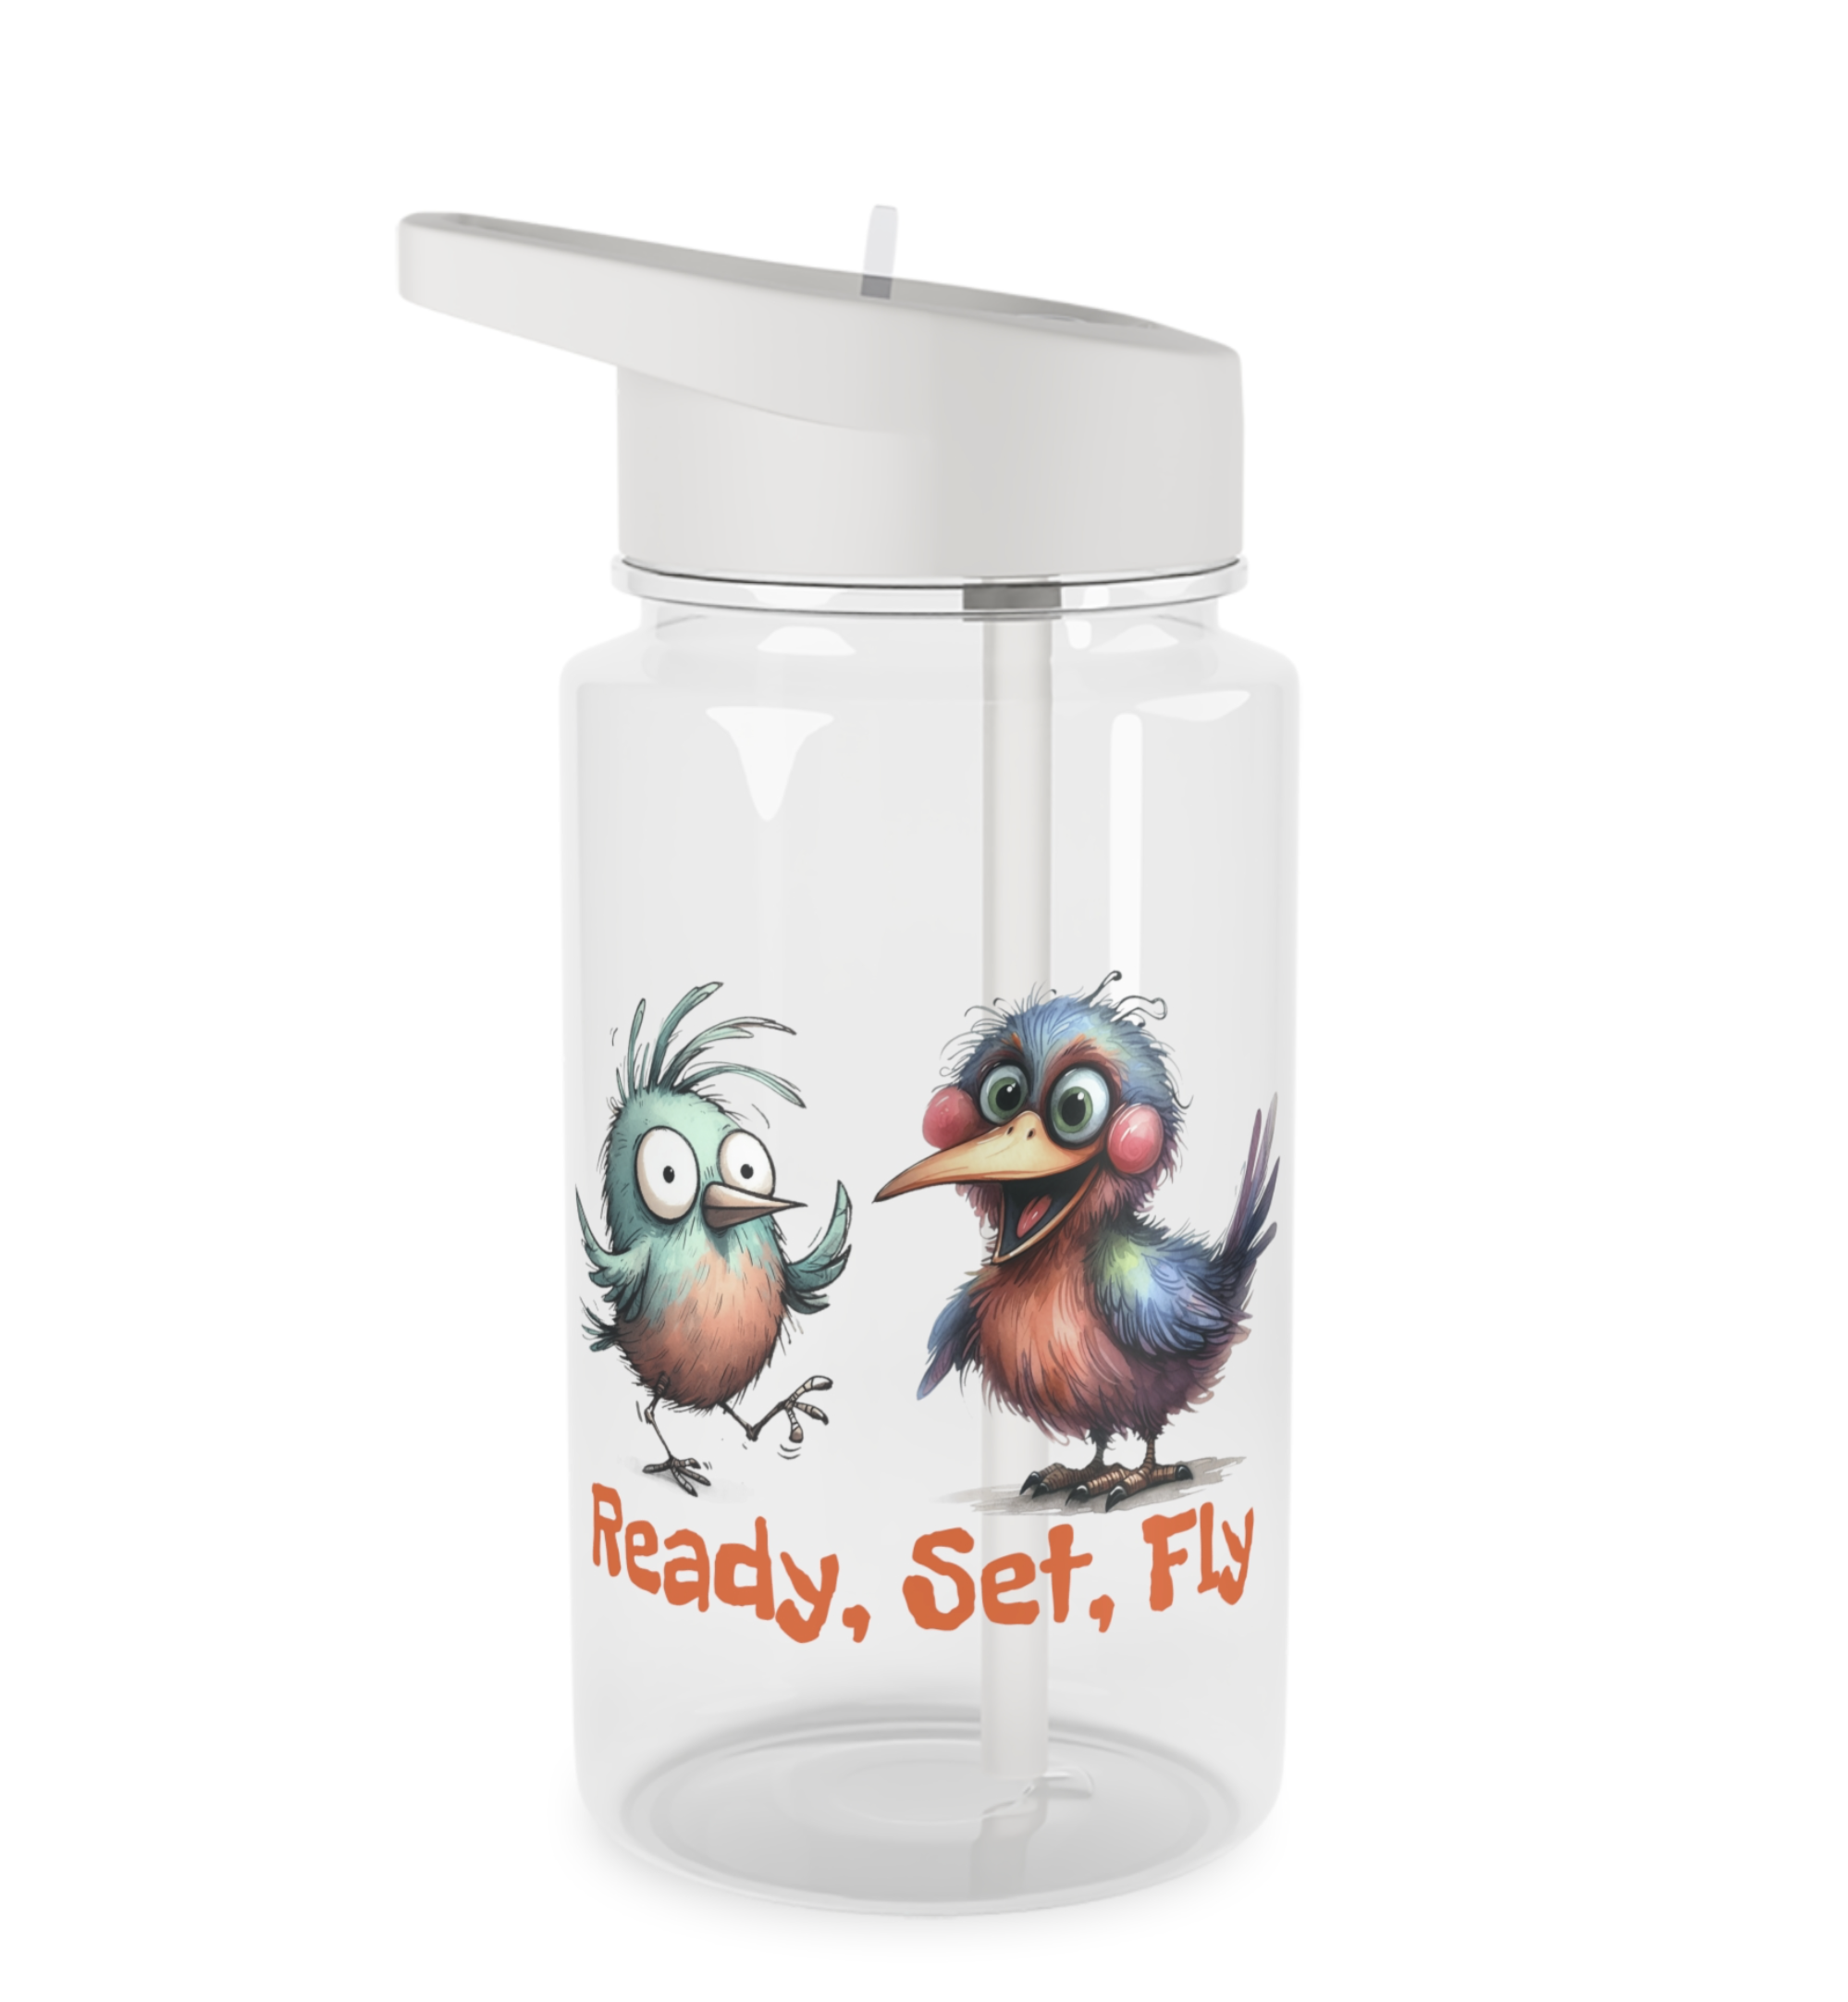 water bottle with two cartoon baby birds and the text Ready, Set, Fly